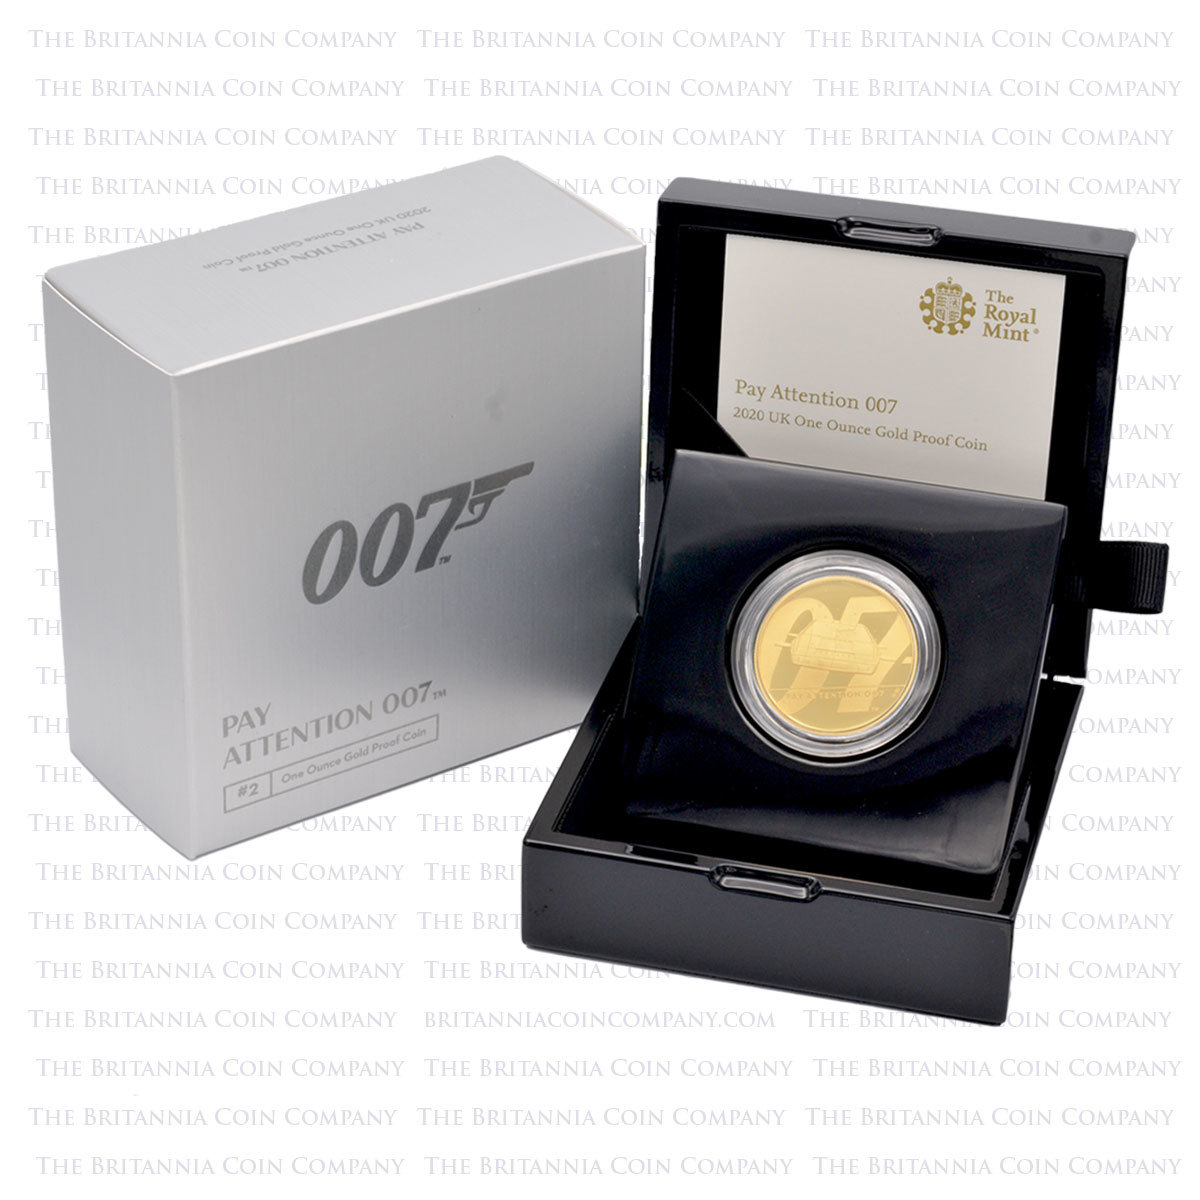 UK20B2GP 2020 James Bond Pay Attention 007 1 Ounce Gold Proof Boxed